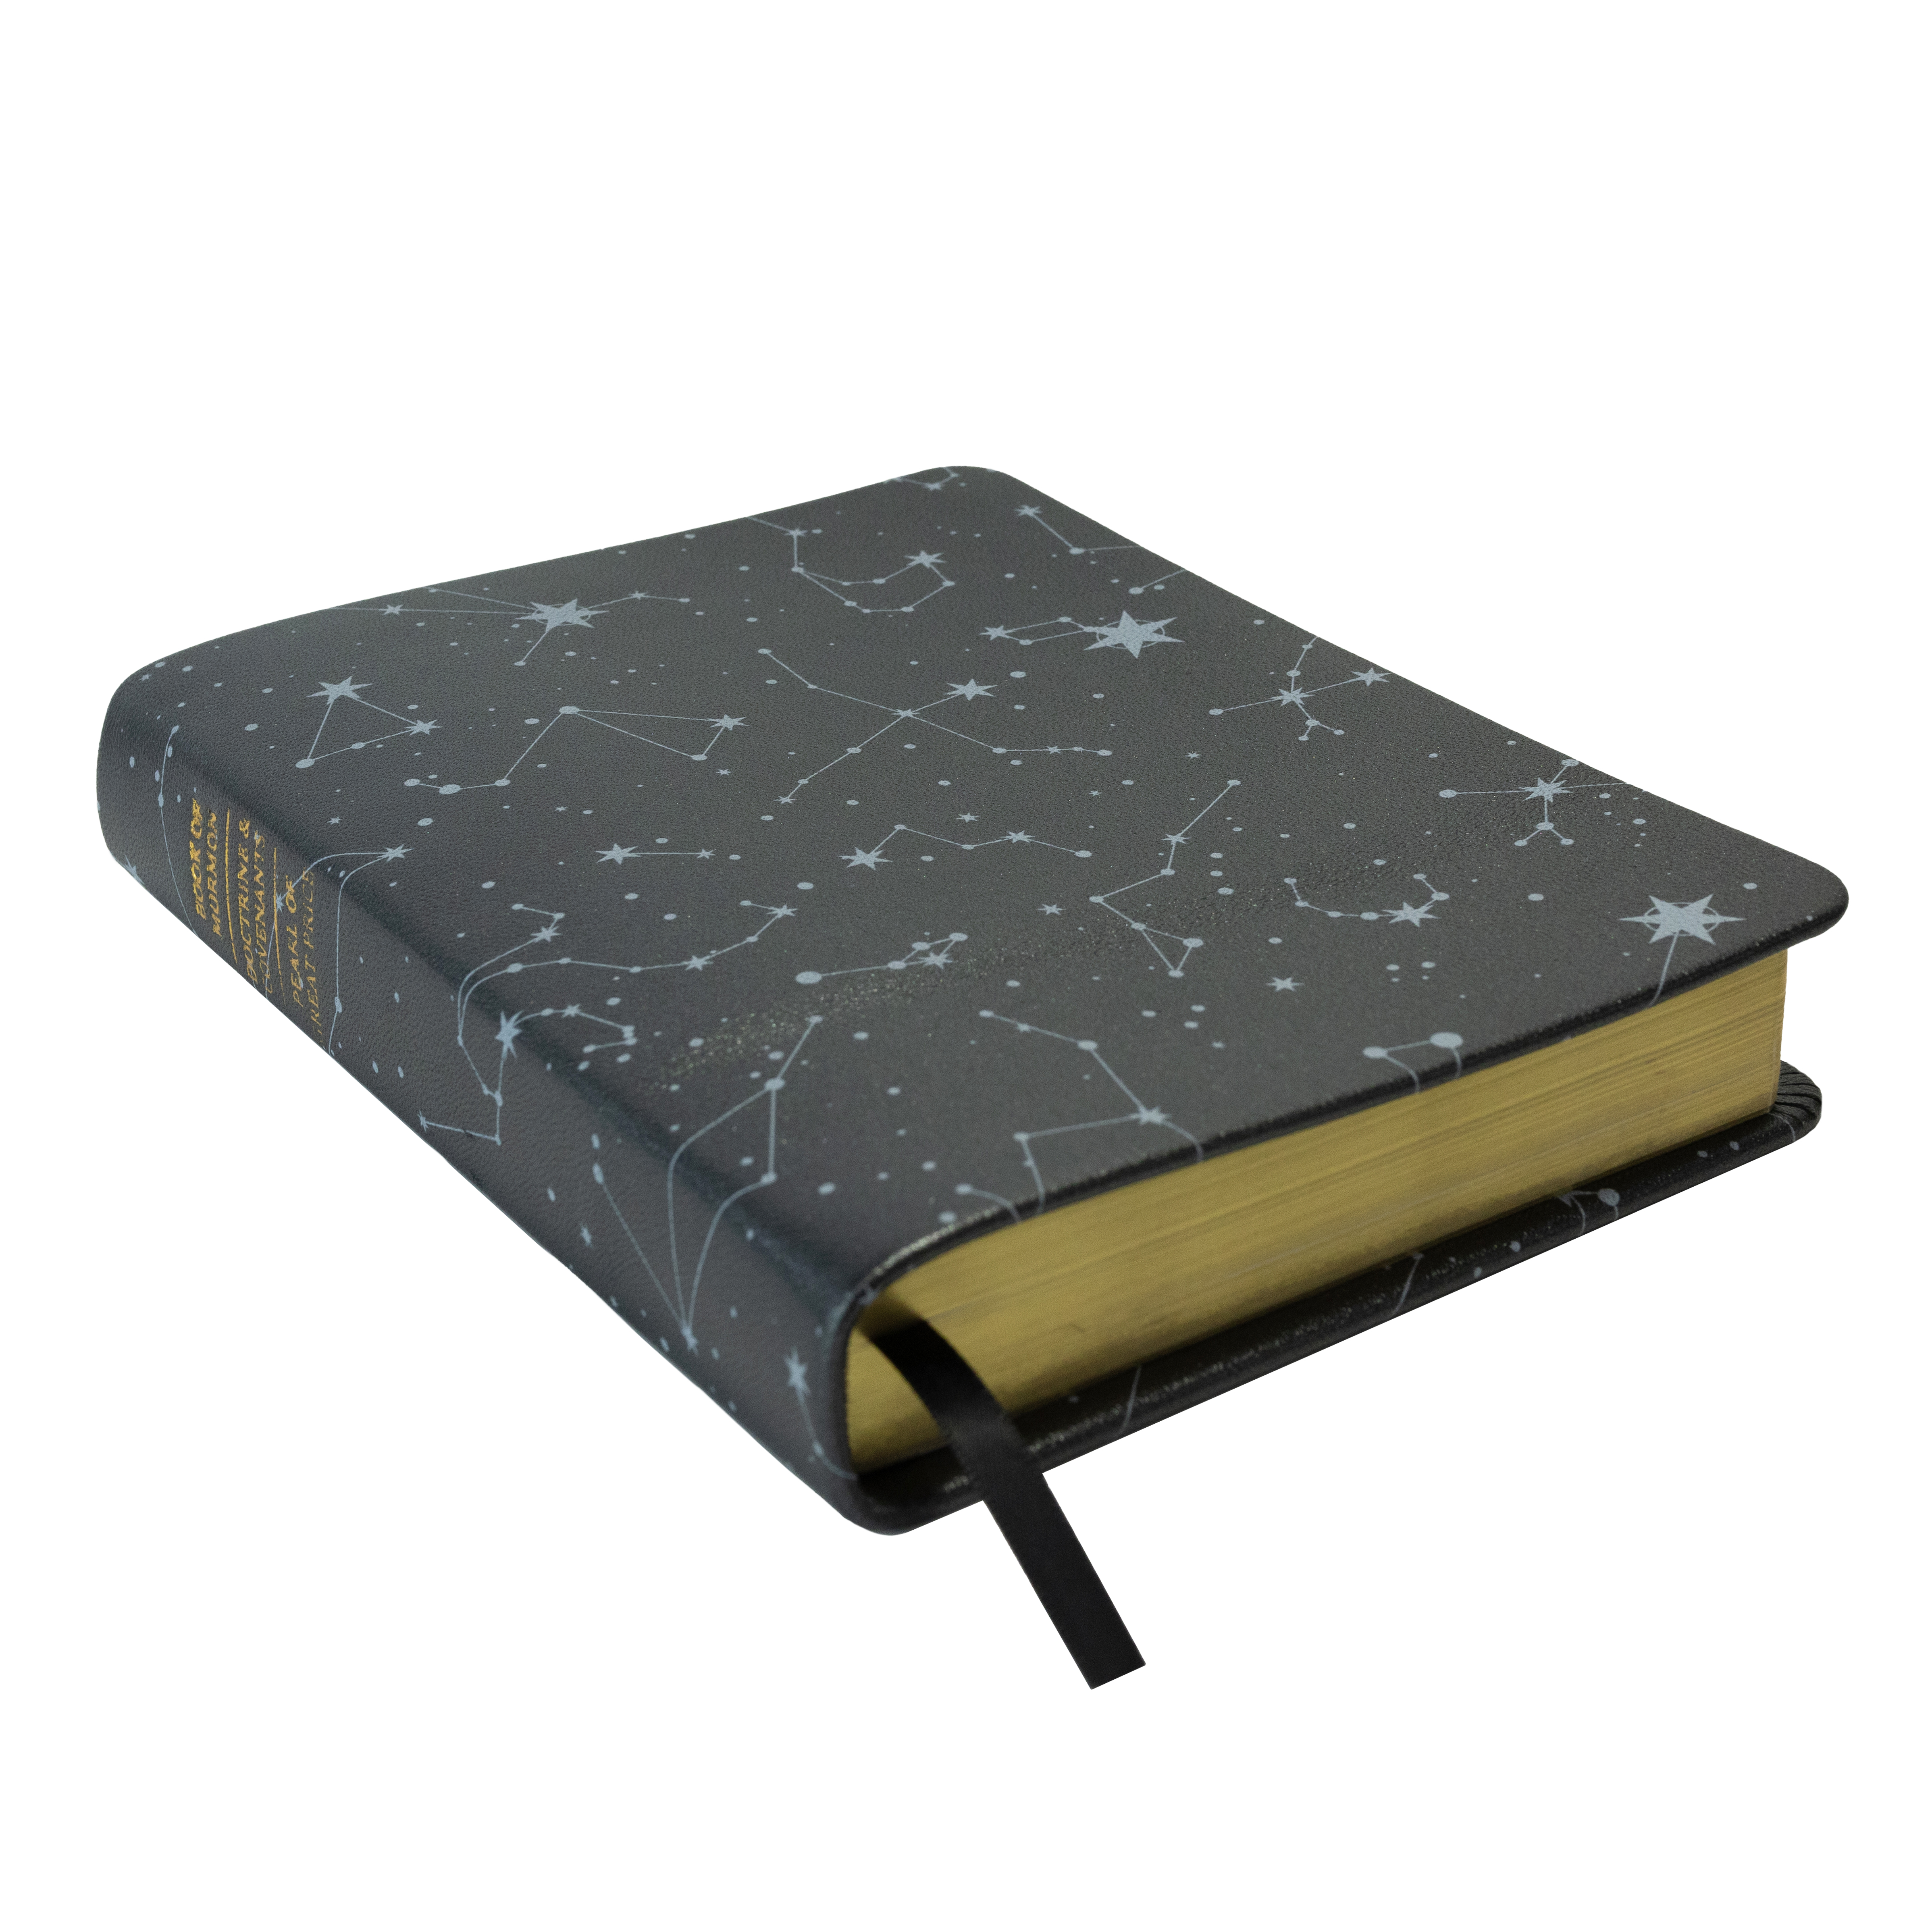 Hand-Bound Genuine Leather Triple - Zodiac Constellations pattern scriptures, patterned scriptures, lds scriptures, scriptures, constellation, constellation scriptures, star, stars, constellations, star scriptures, starry, starry scriptures